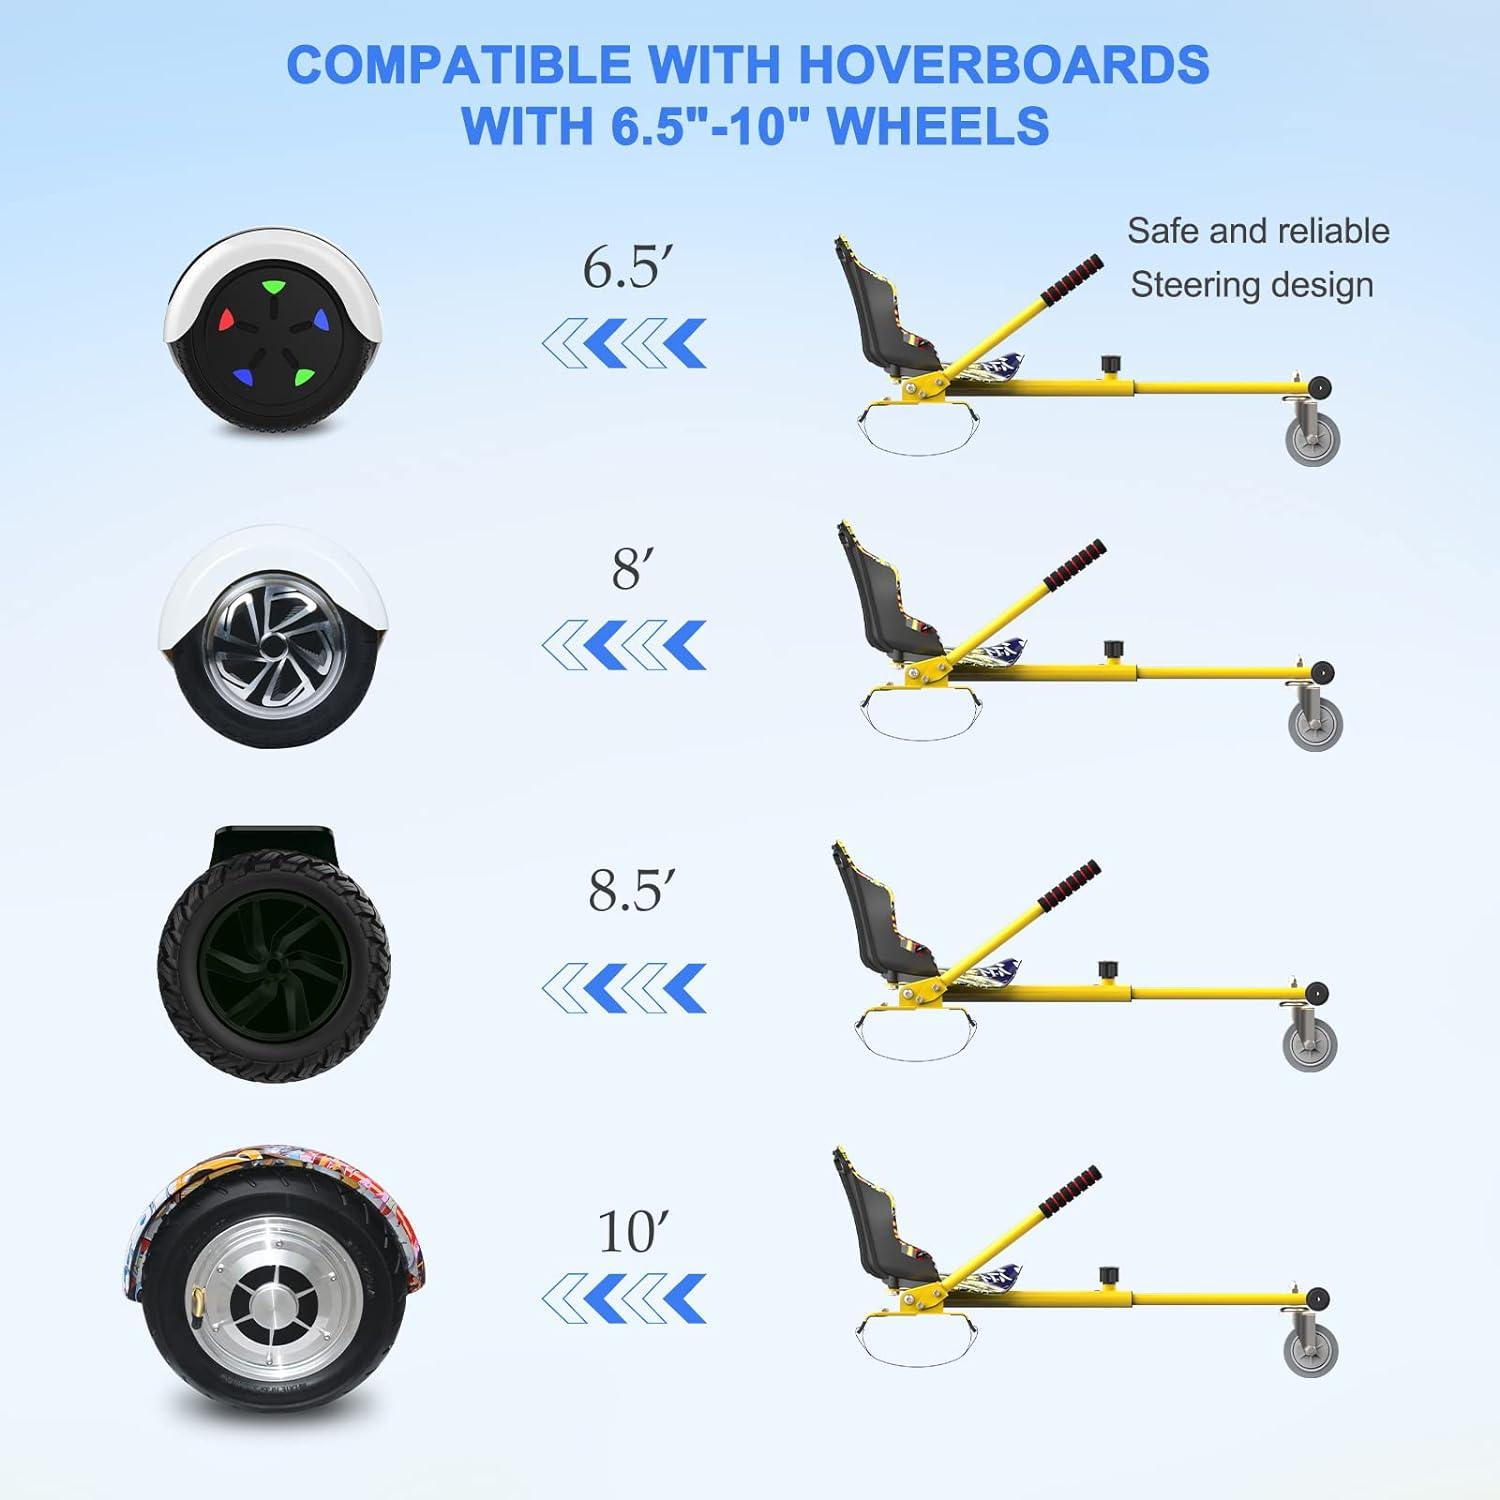 Hoverkart Go-Kart Accessories for Hoverboards 6.5in-10in Self-Balancing - Massive Discounts